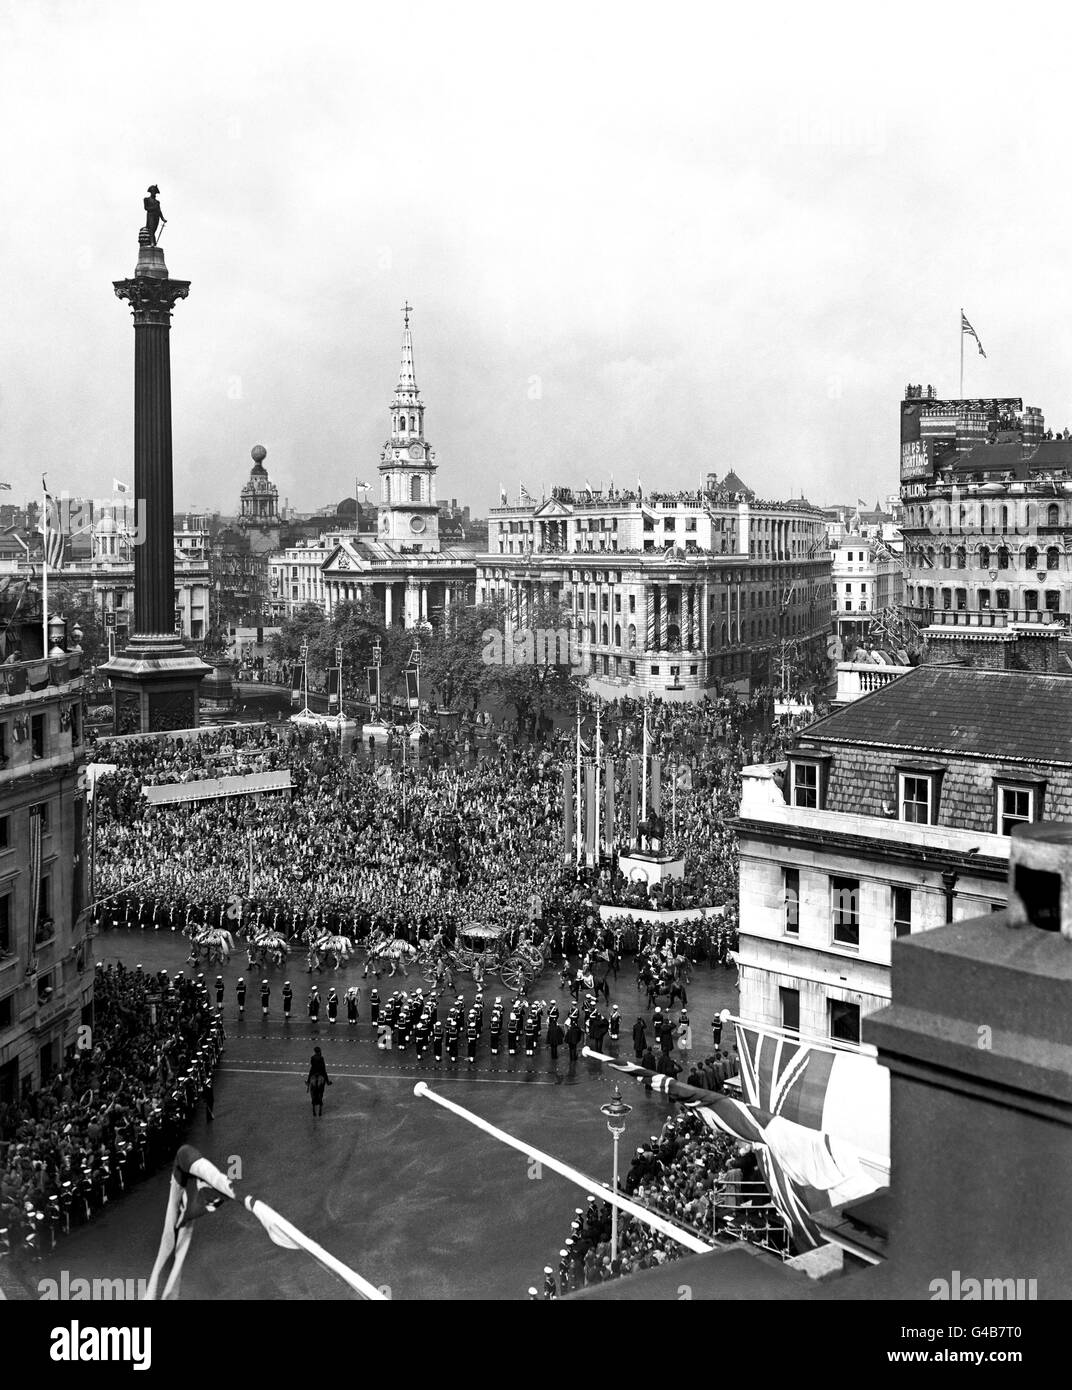 The Coronation procession passes through Trafalgar Square on the return journey from Westminster Abbey to Buckingham Palace after Queen Elizabeth II's Coronation. Stock Photo